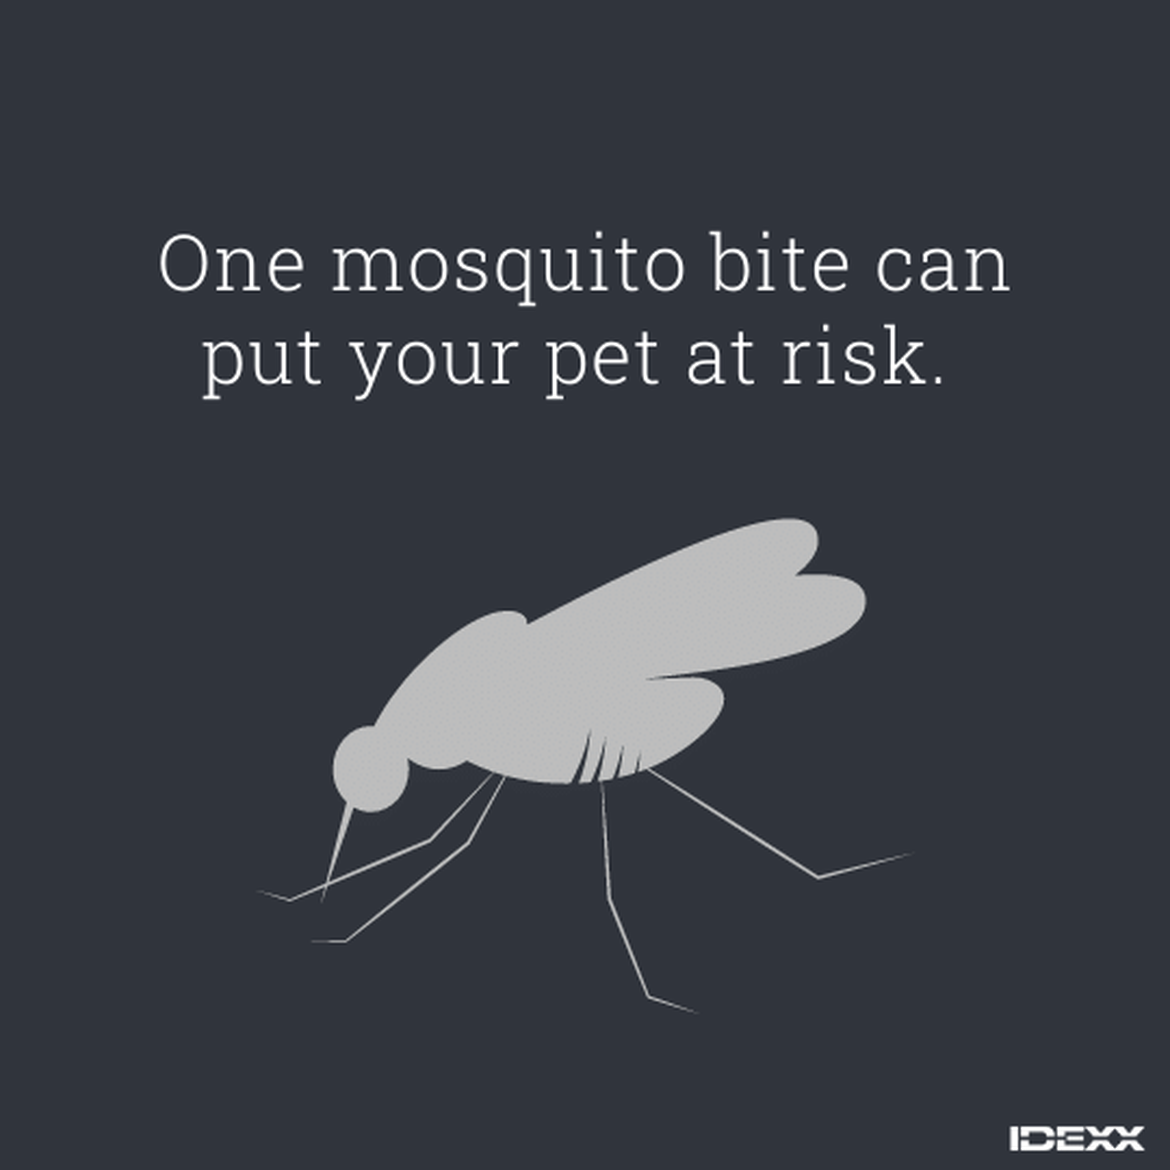 Graphic illustration of a mosquito.